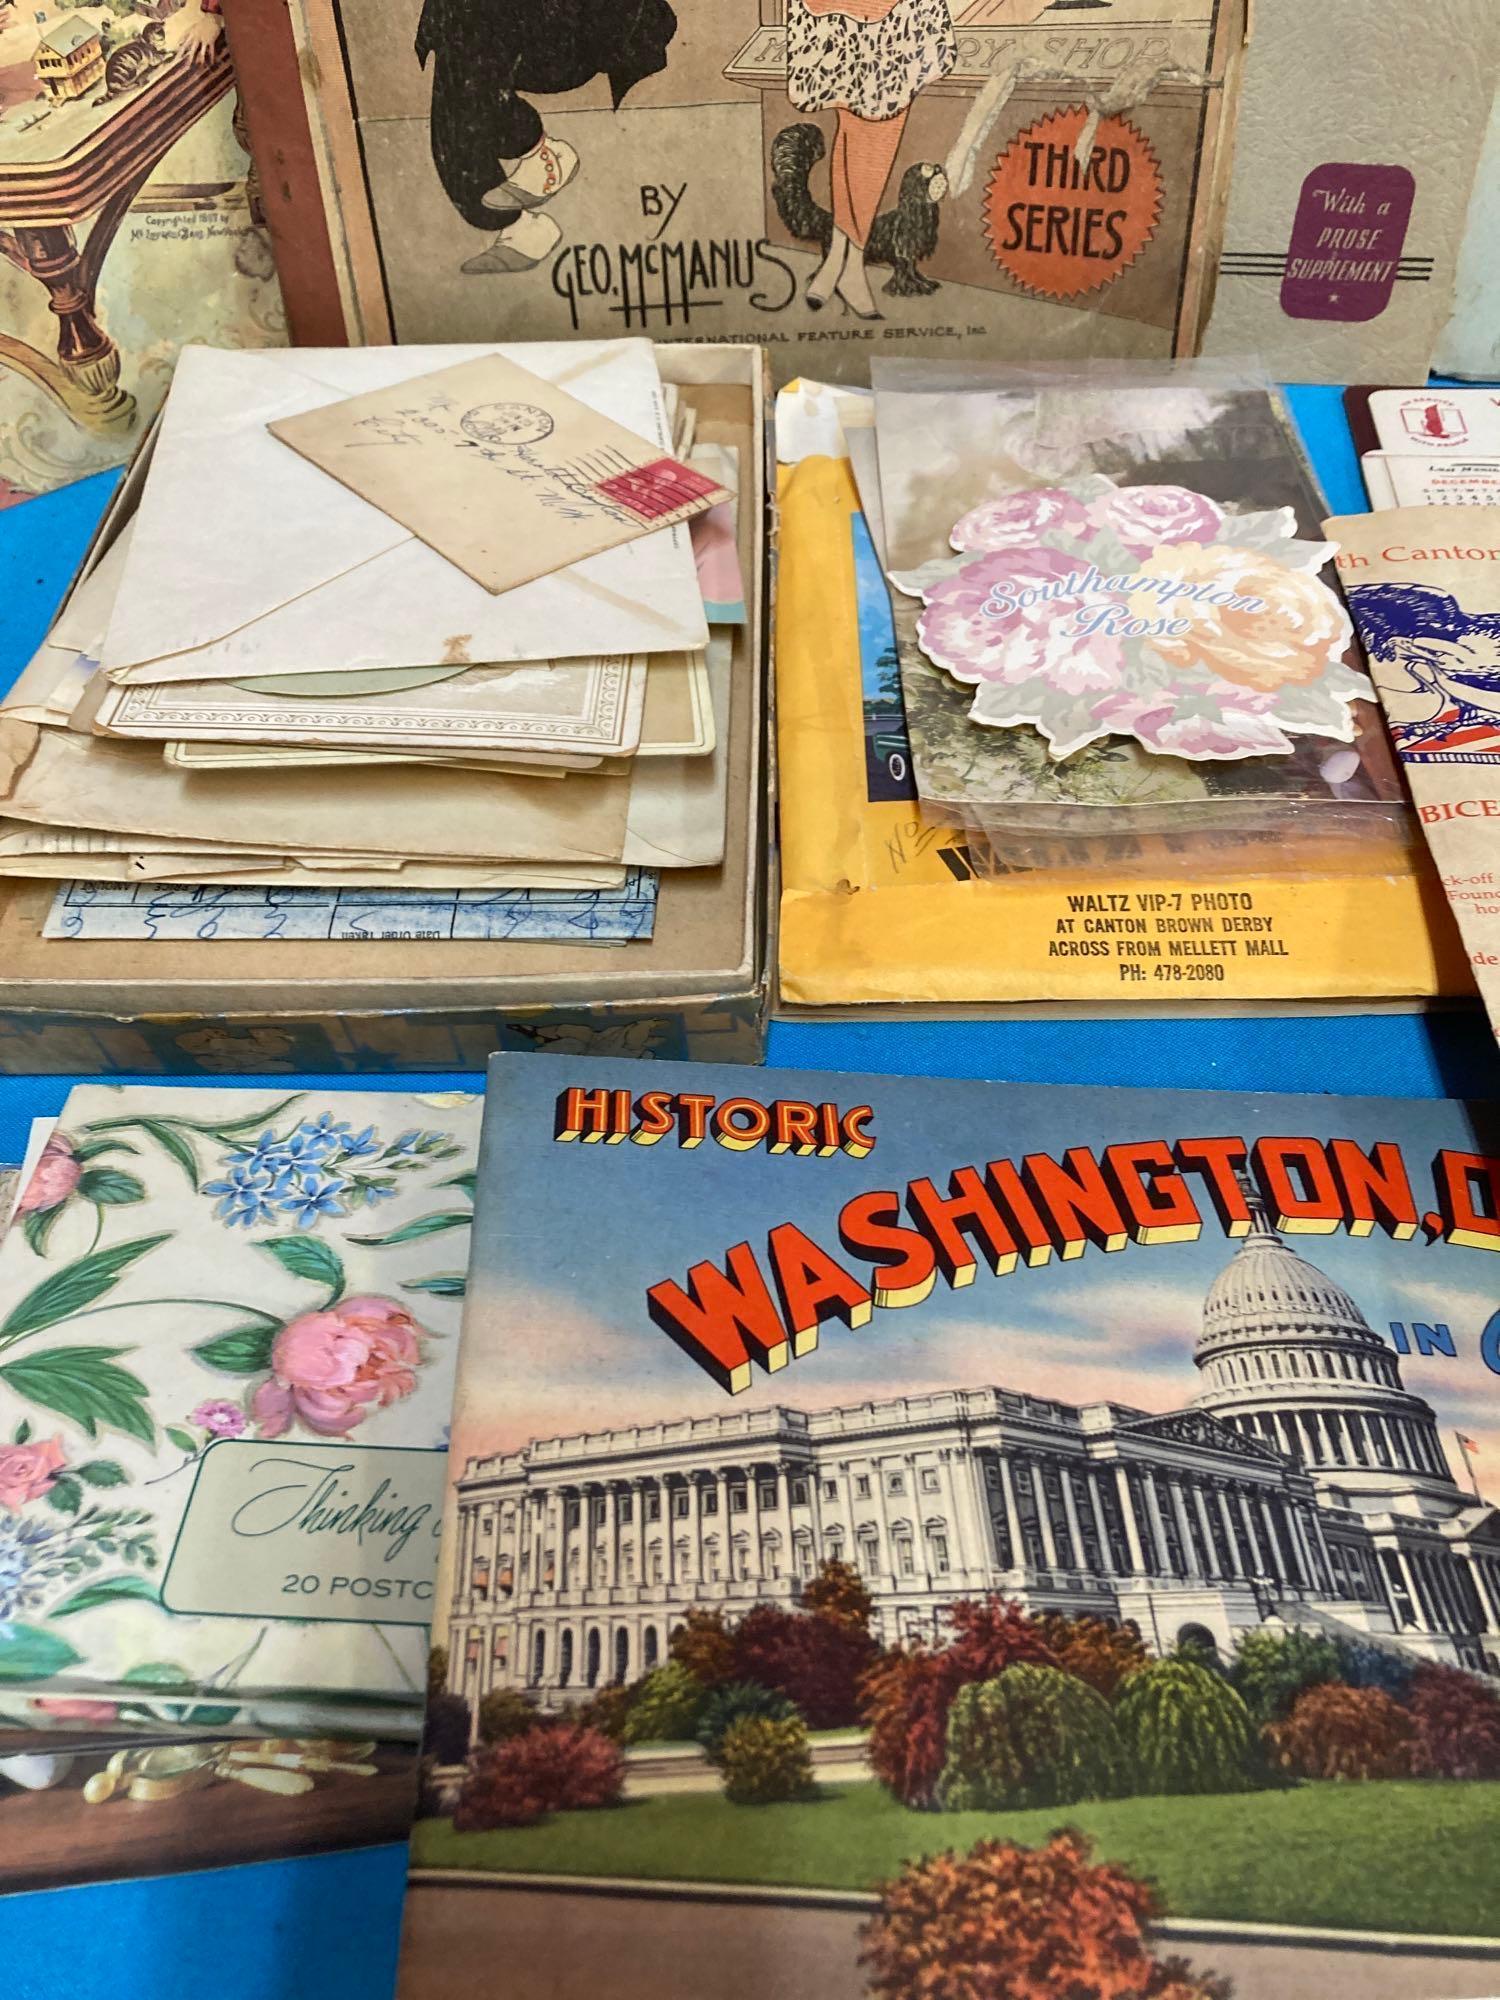 Ephemera old letters, postcards, books, and more